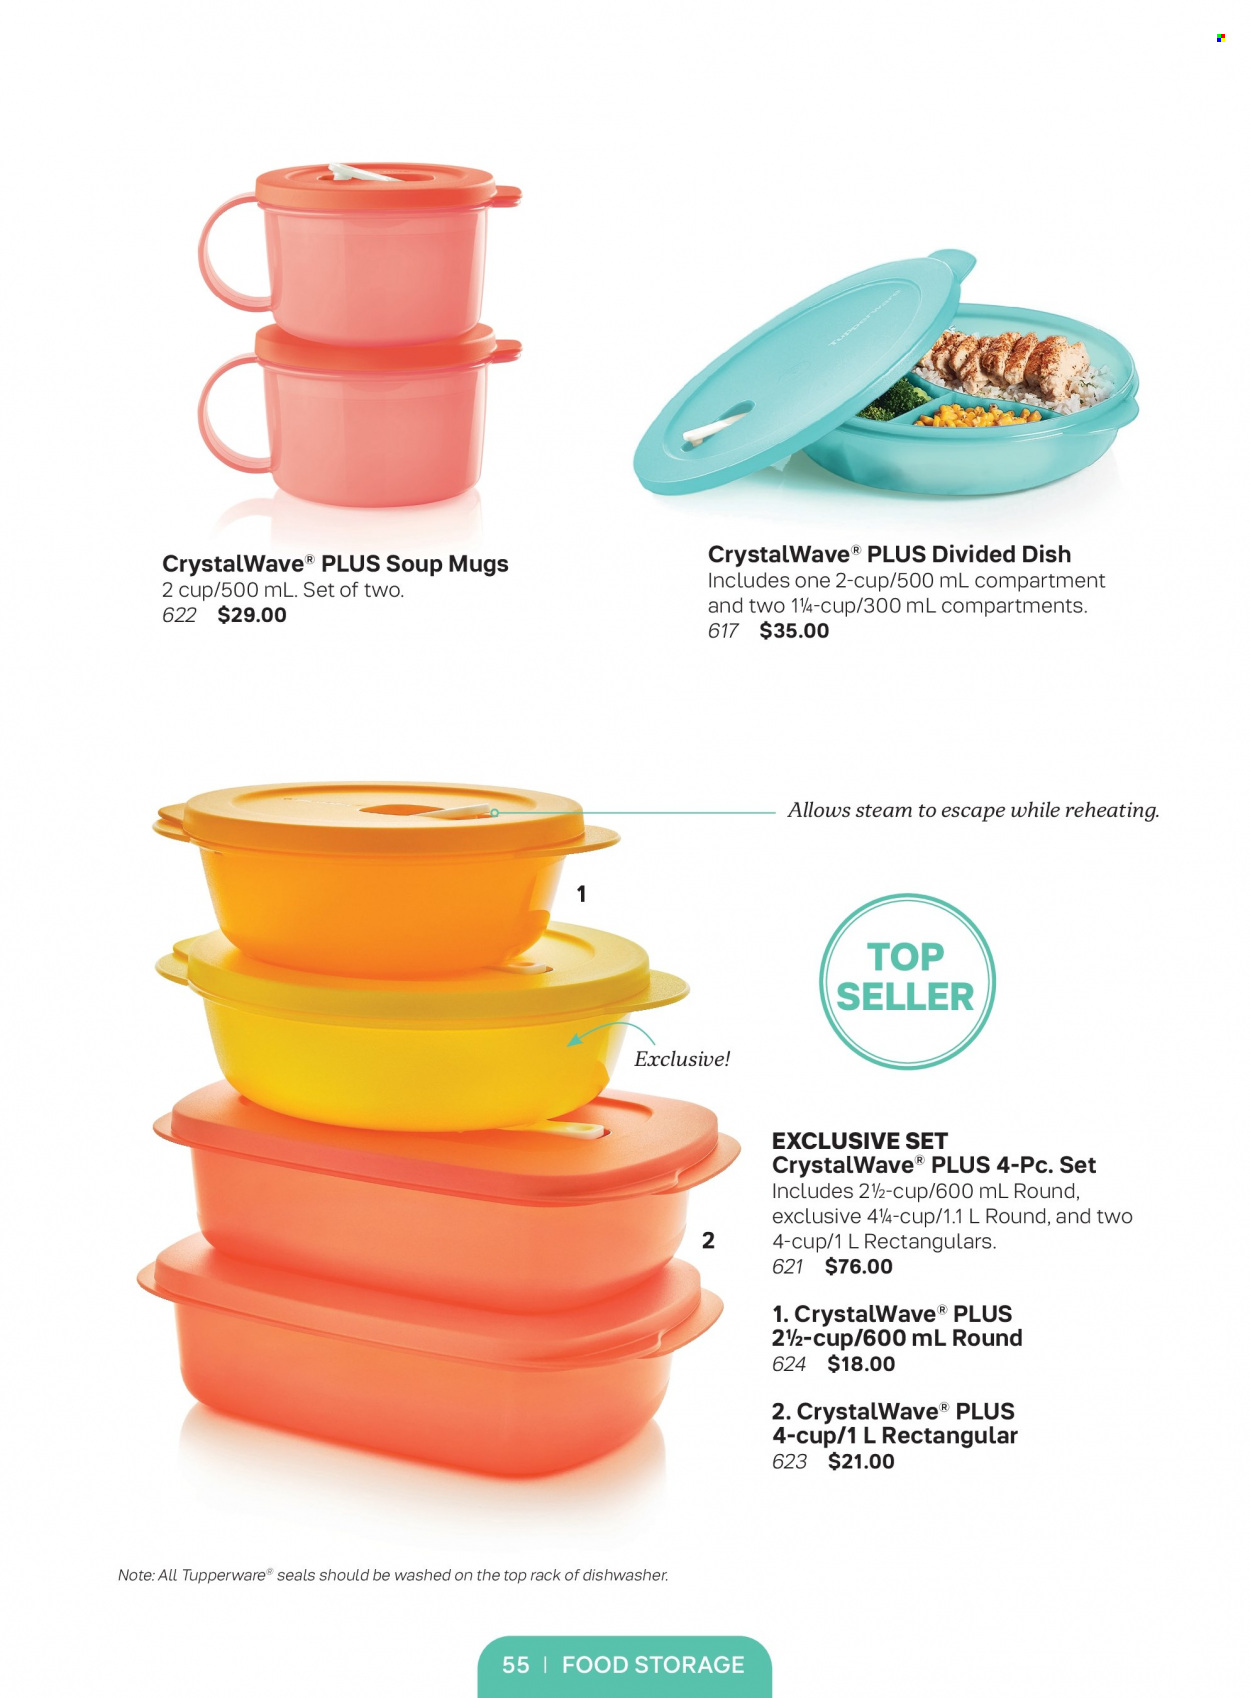 Circulaire Tupperware . Page 55.